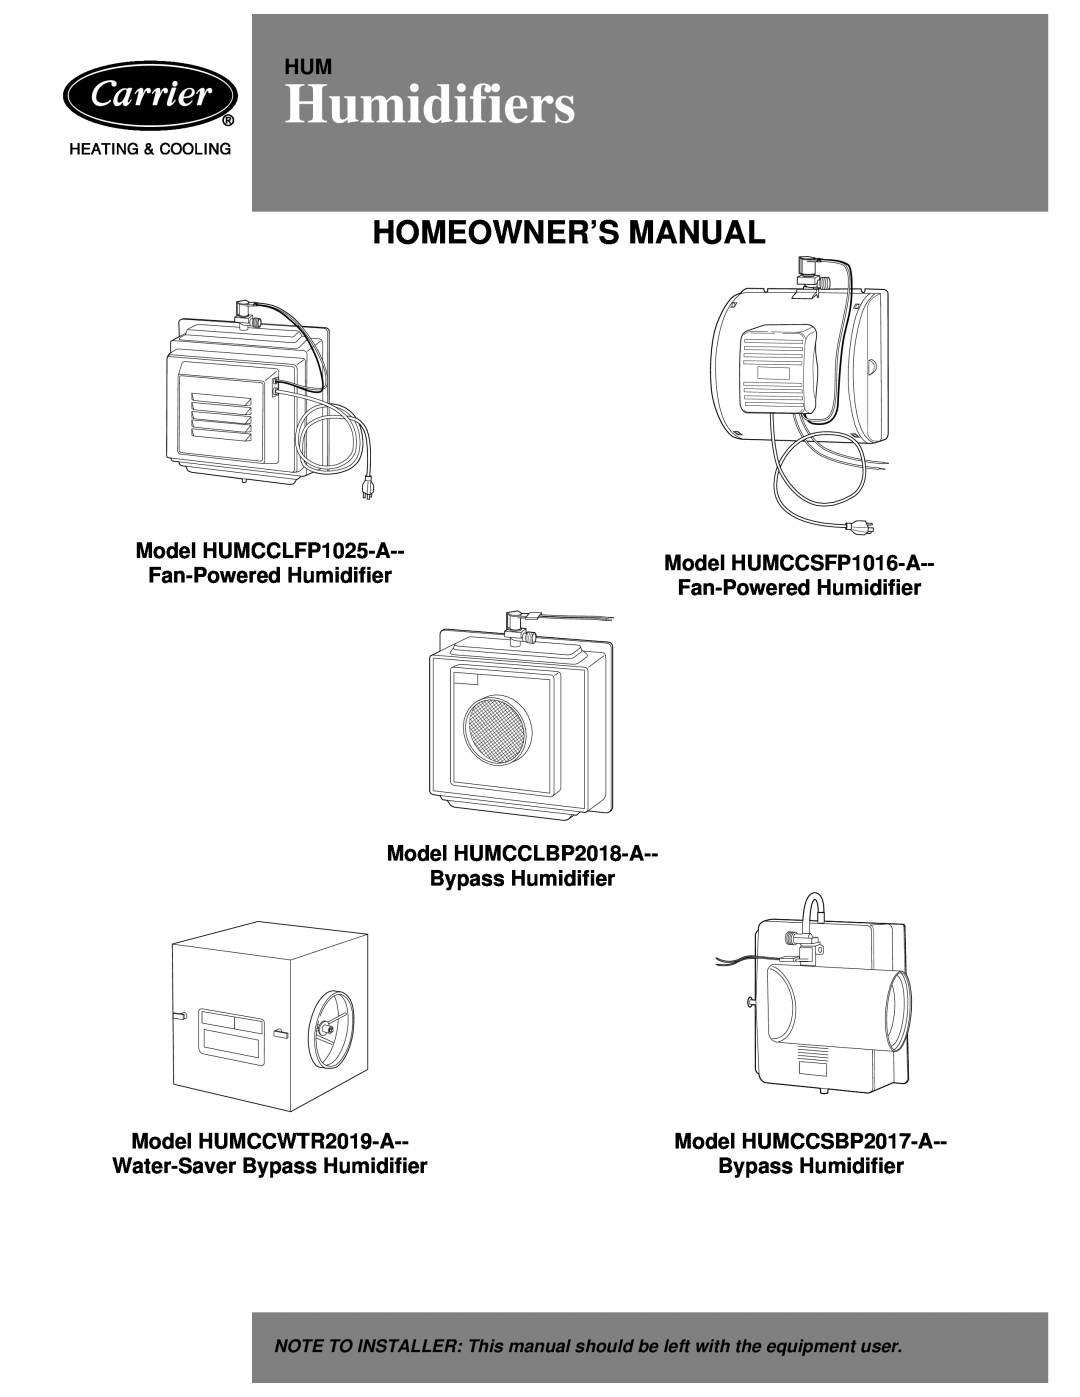 Carrier owner manual Model HUMCCLFP1025-A Model HUMCCSFP1016-A Fan-Powered Humidifier, Model HUMCCWTR2019-A 